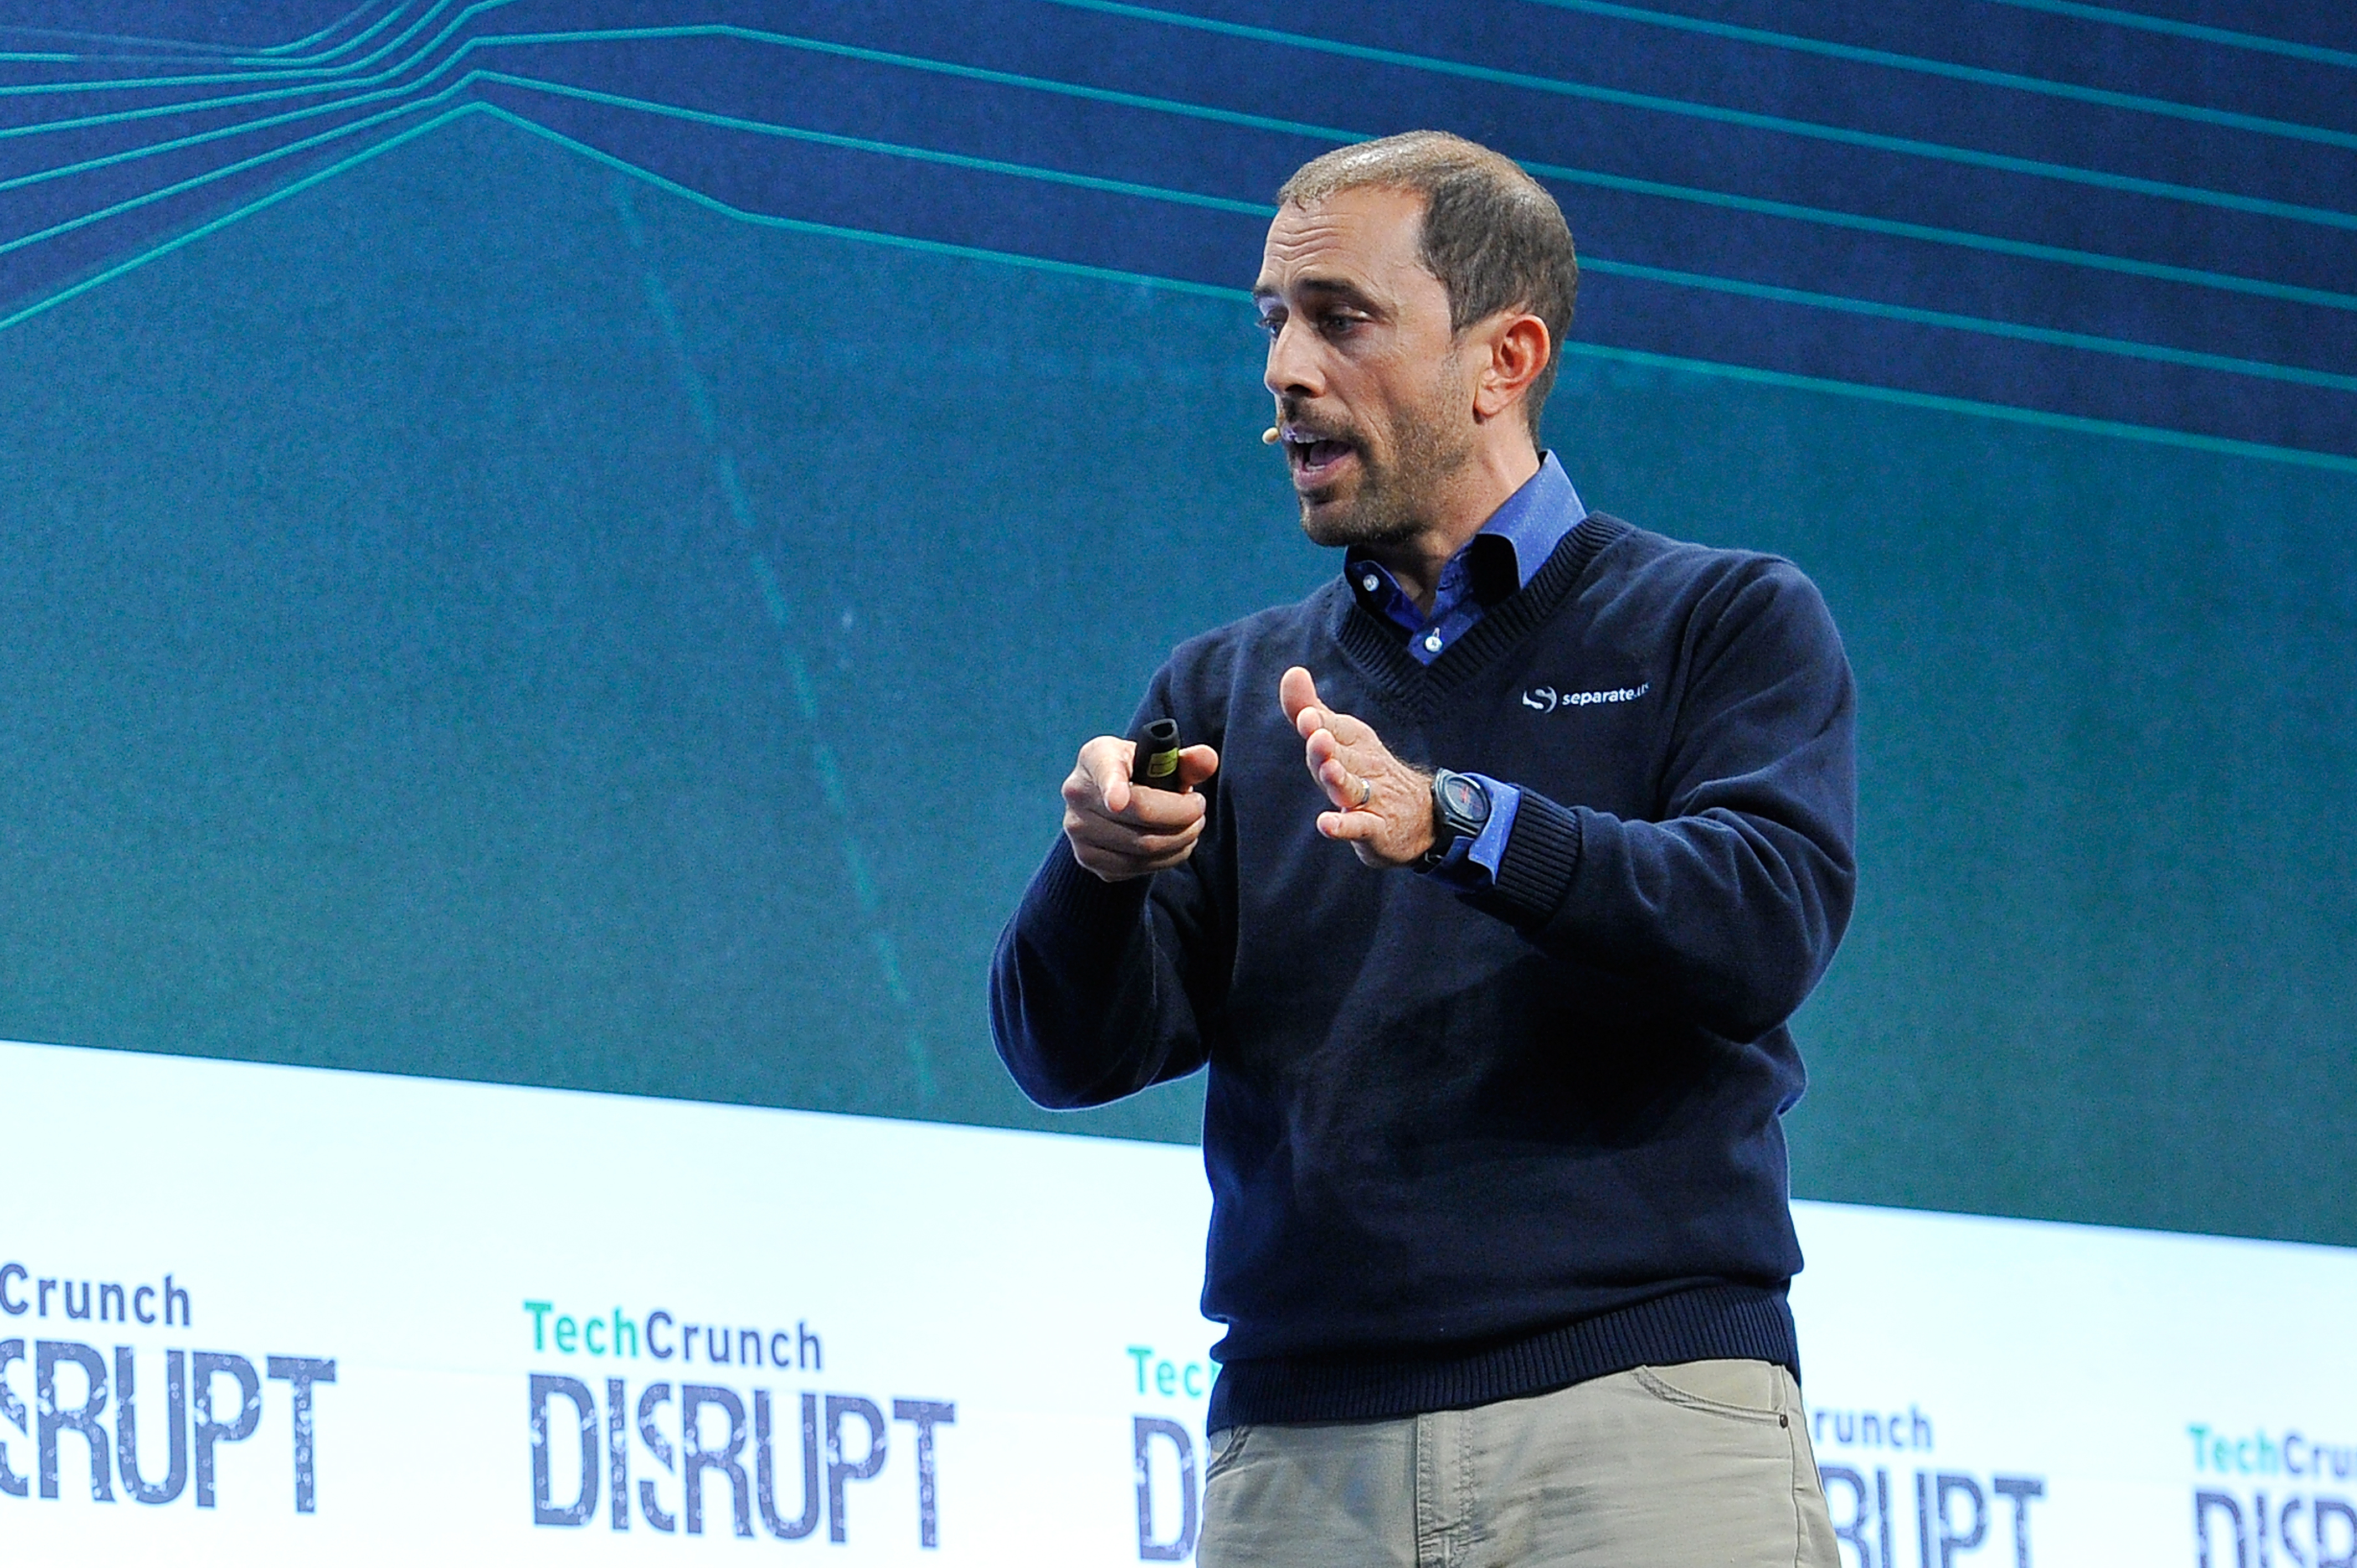 The group from separate.us presents to the judges onstage at TechCrunch Disrupt SF 2015 on Sept. 22, 2015 in San Francisco, Calif. (Steve Jennings—Getty Images)